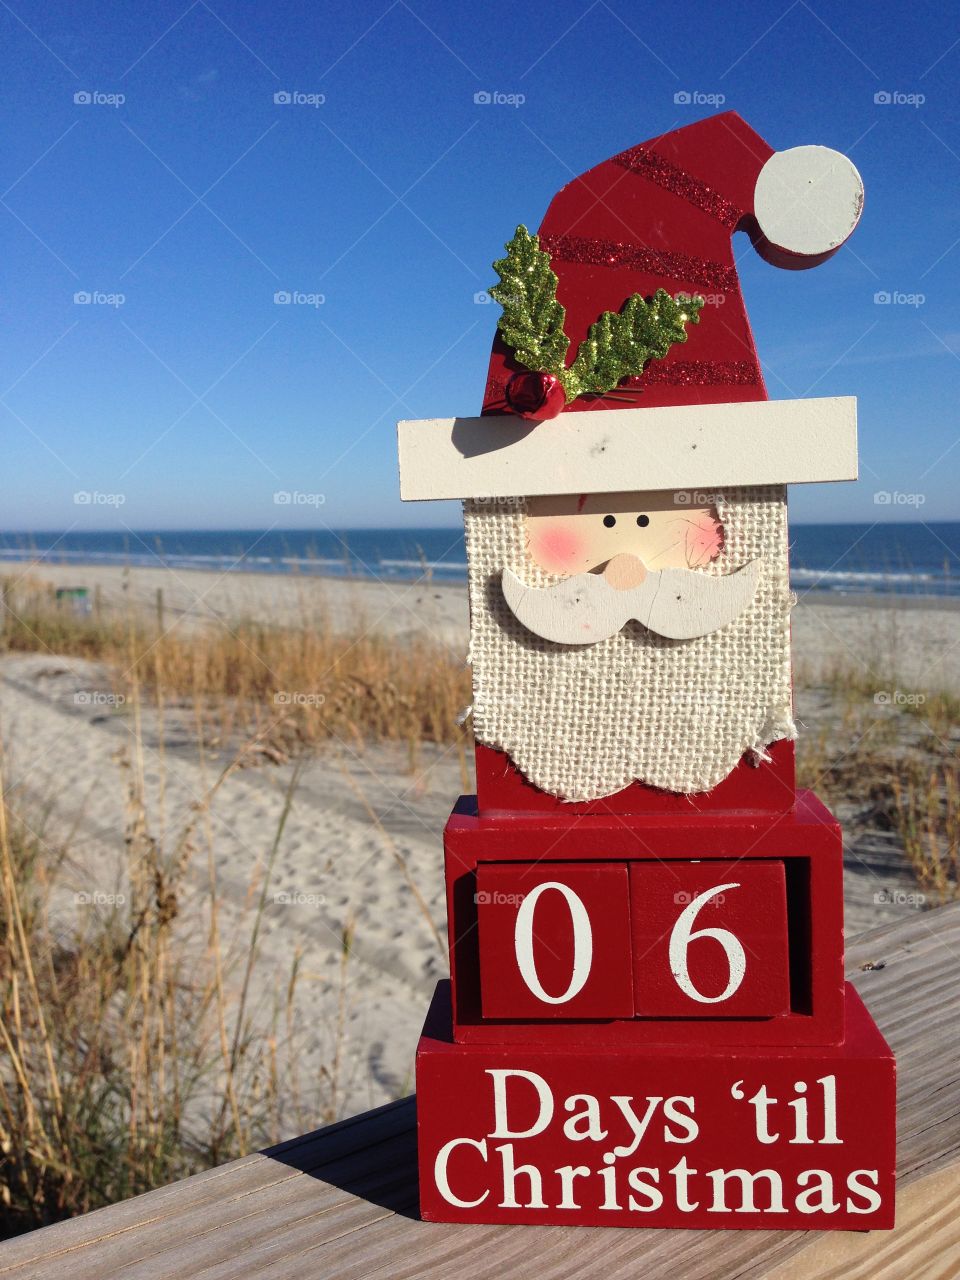 6 days till Christmas and santas gone to the beach. 